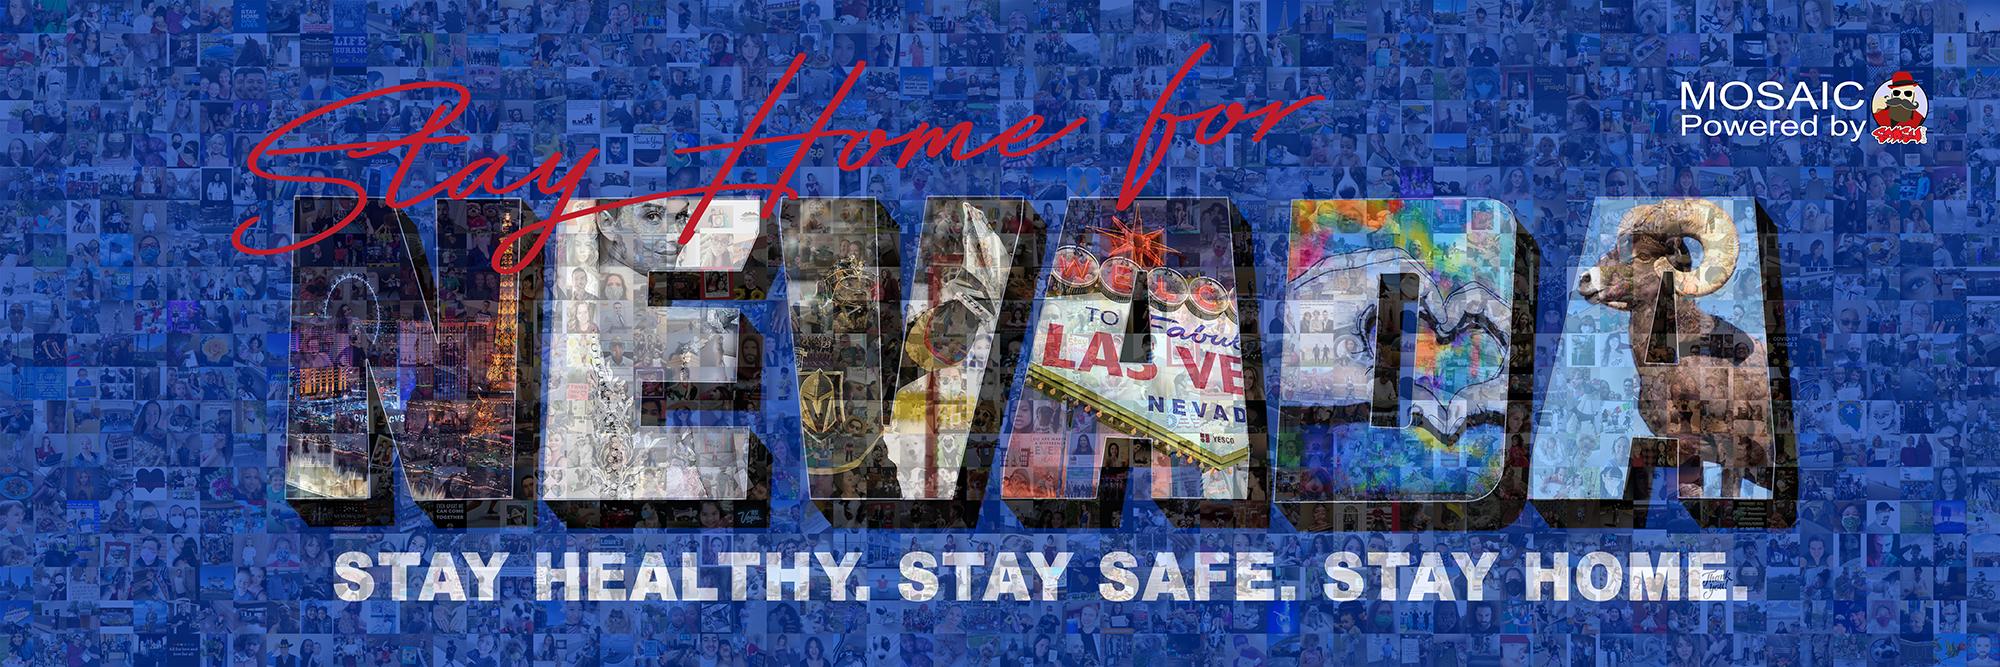 stay home for Nevada healthy stay safe